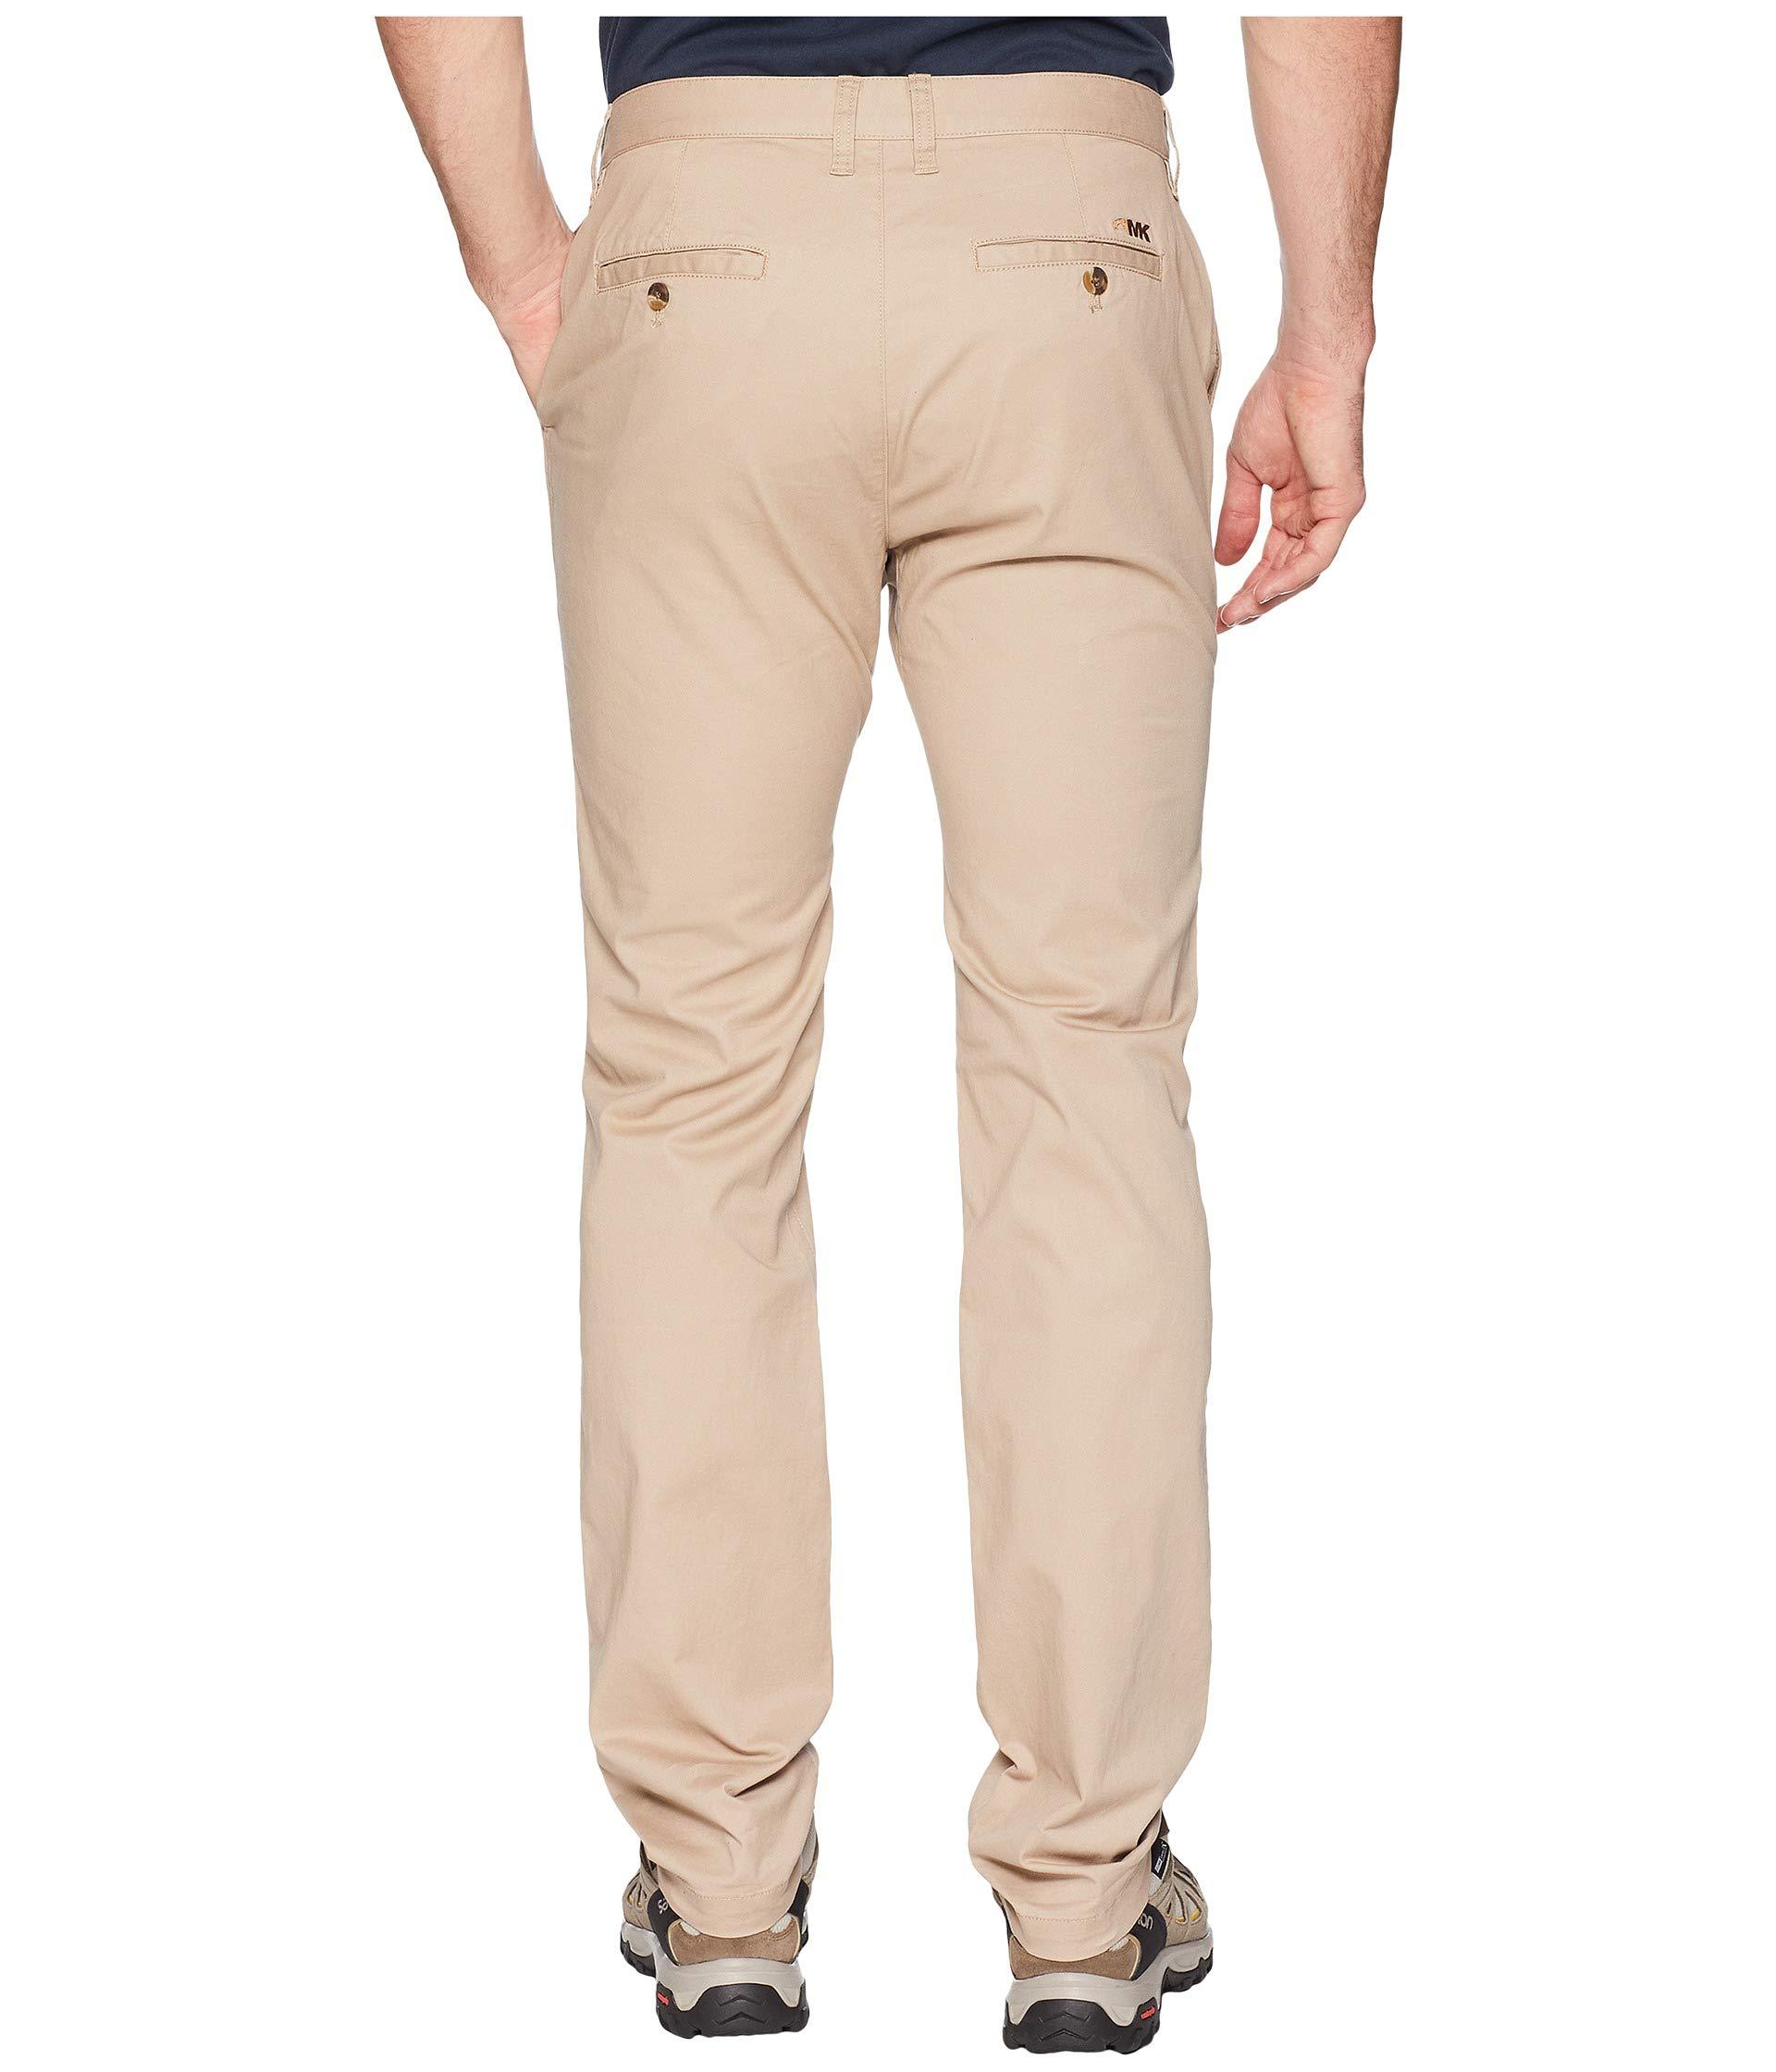 Mountain Khakis Cotton Jackson Chino Pants Slim Fit in Pink for Men - Lyst